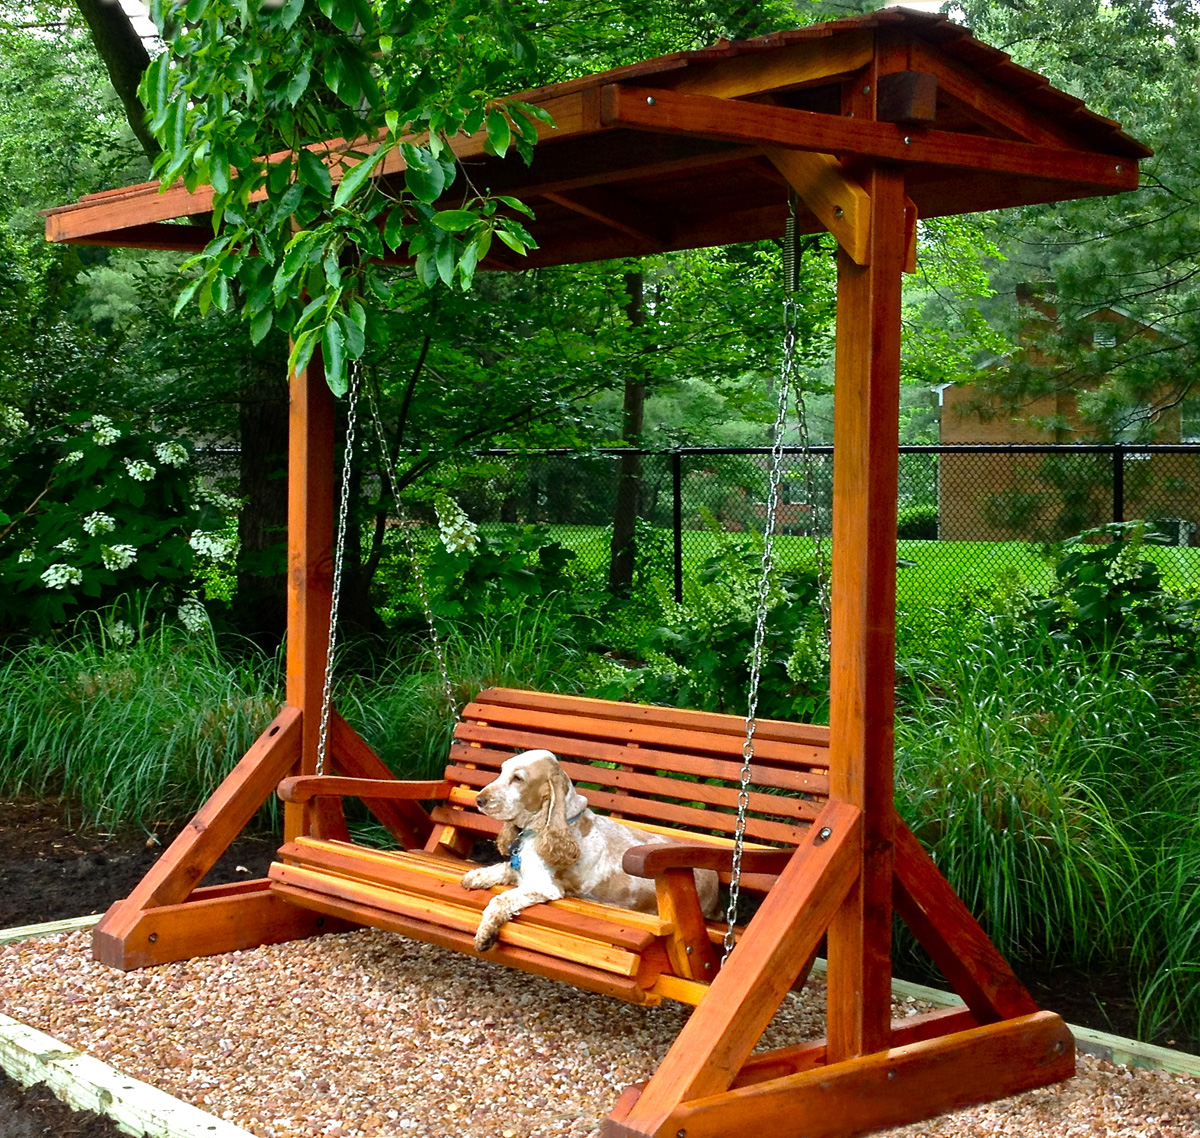 Bench Swing Sets, Built to Last Decades | Forever Redwood